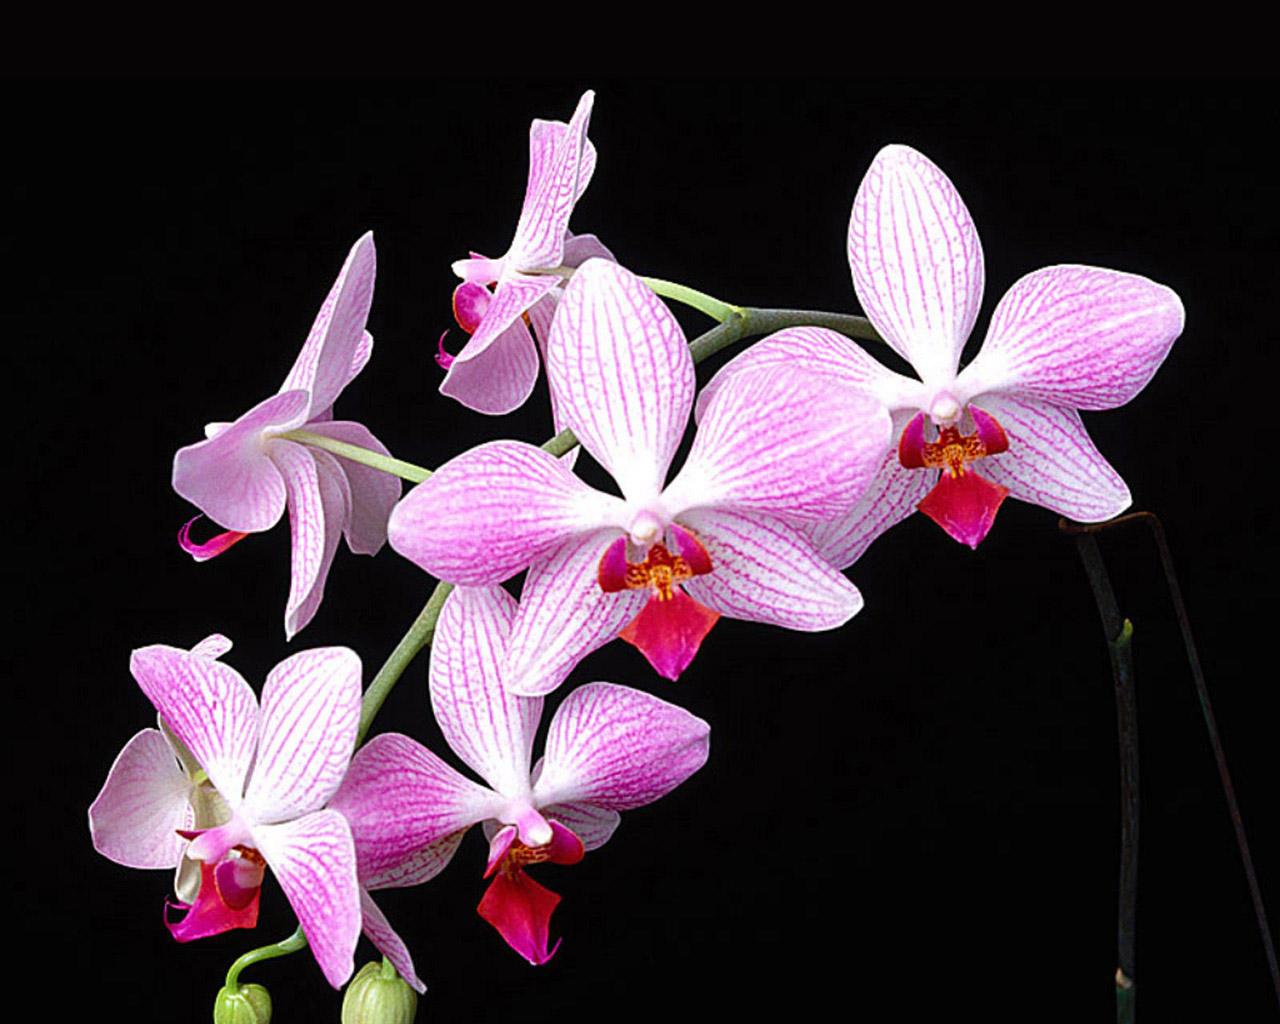 Wild Orchids Wallpaper Free HD Background Image Picture